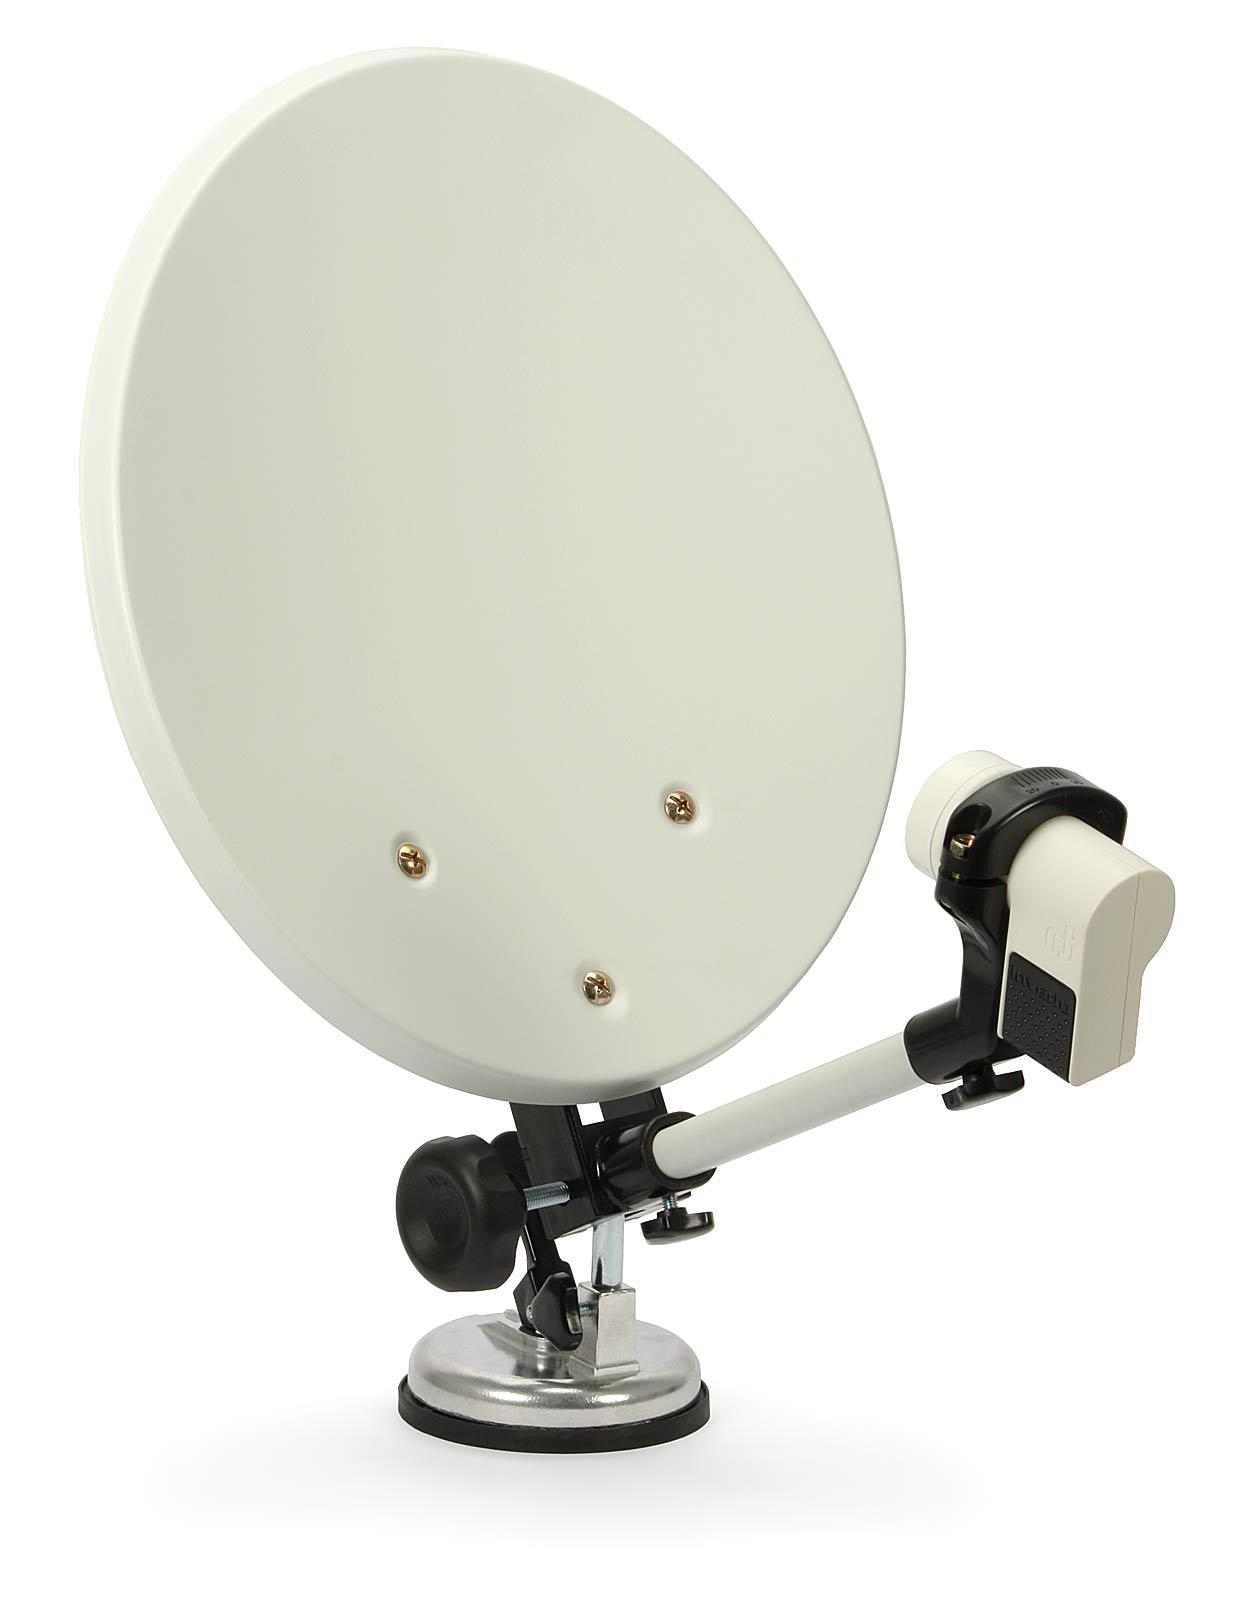 TV antenna for camping – image 1